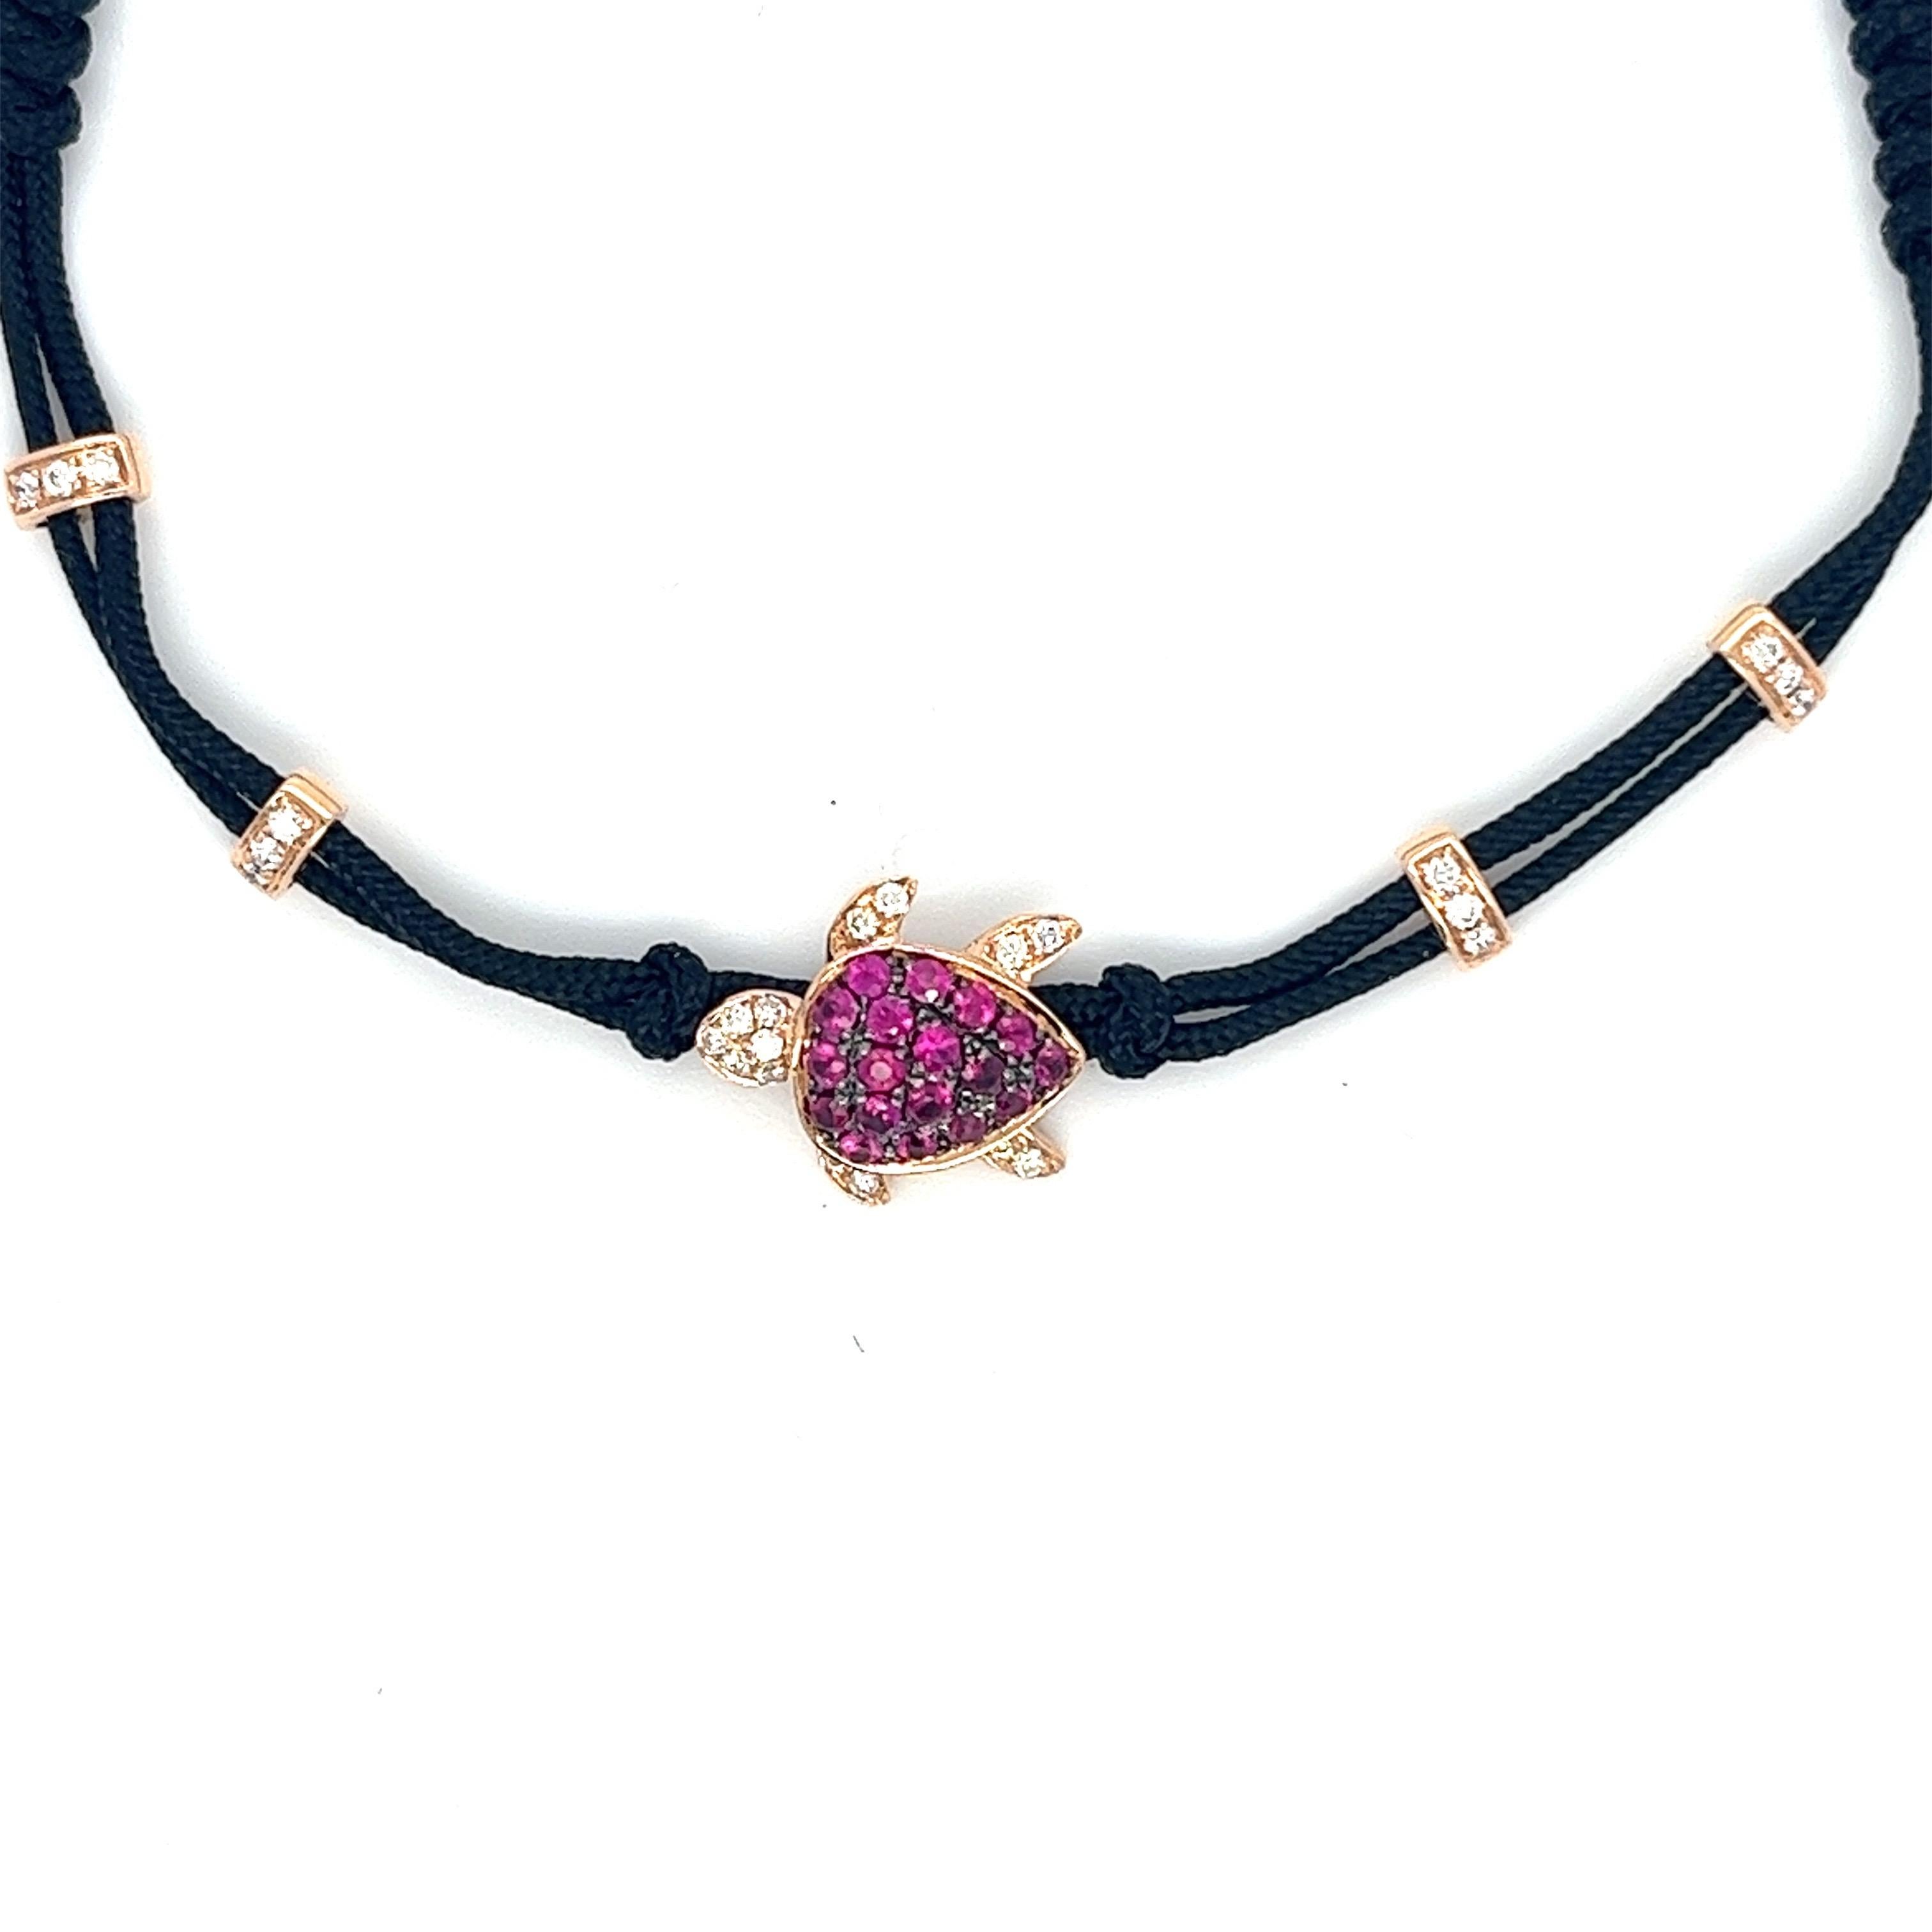 18K Rose Gold Turtle Woven Bracelet with Rubies & Diamonds

18 Rubies - 0.26 CT
26 Diamonds - 0.12 CT
18K Rose Gold - 2.10 GM

This exquisite braided bracelet features a stunning turtle made of rubies, set in 18K gold, exuding an elegant style. The